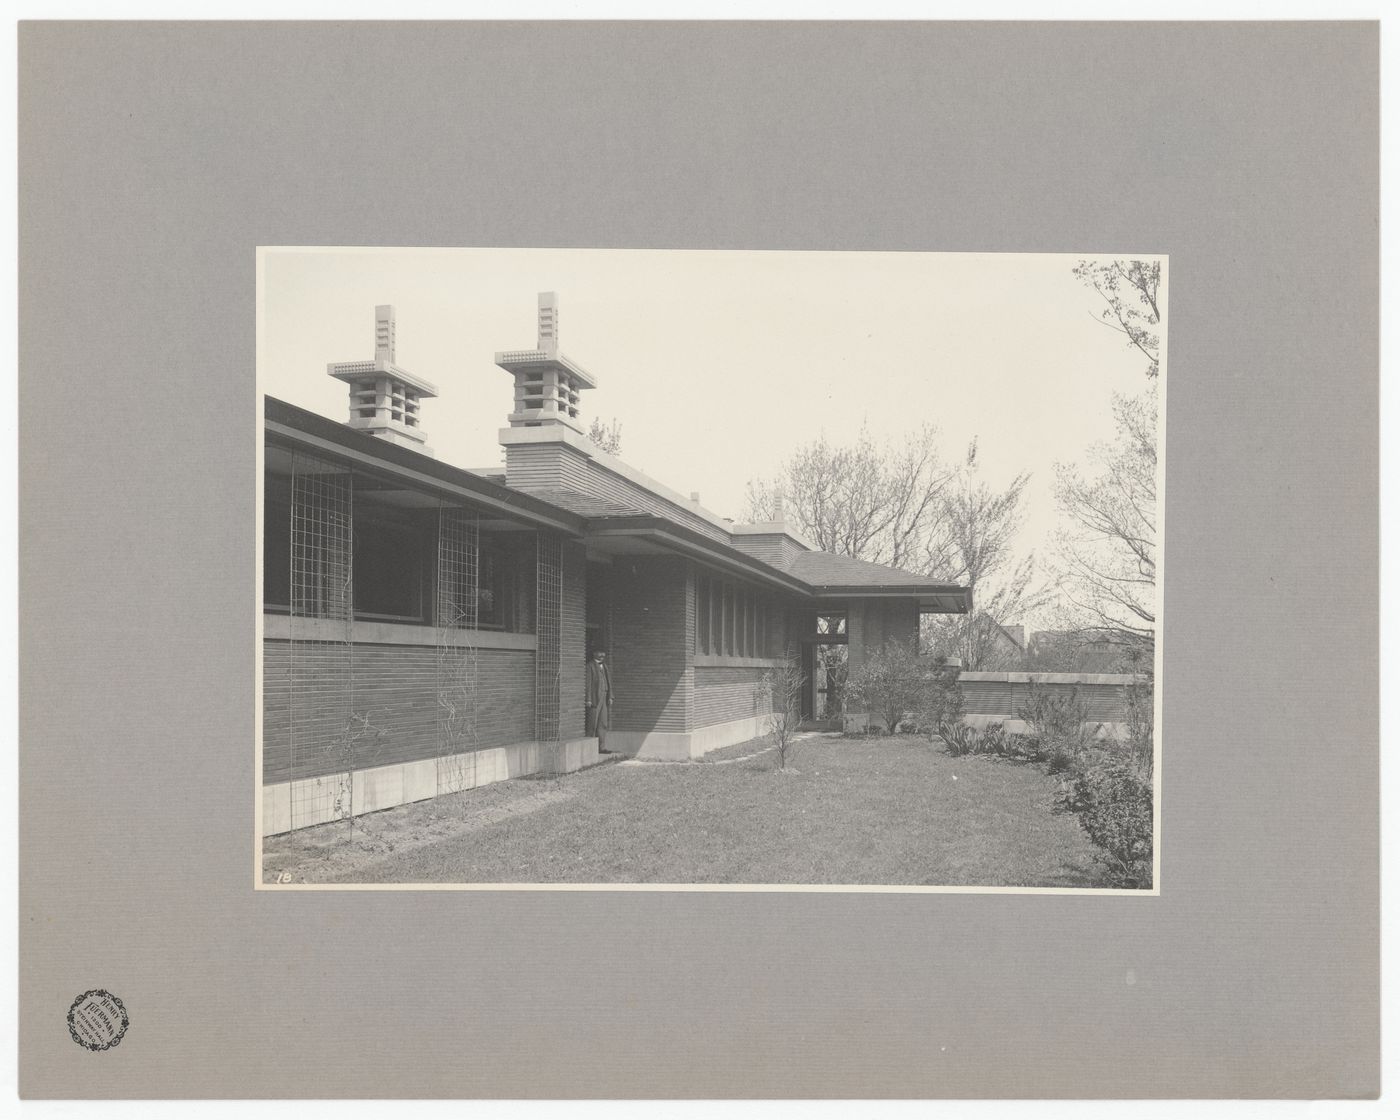 View of Darwin D. Martin House showing a man standing in the doorway and a raking view of the pergola and conservatory, Buffalo, New York